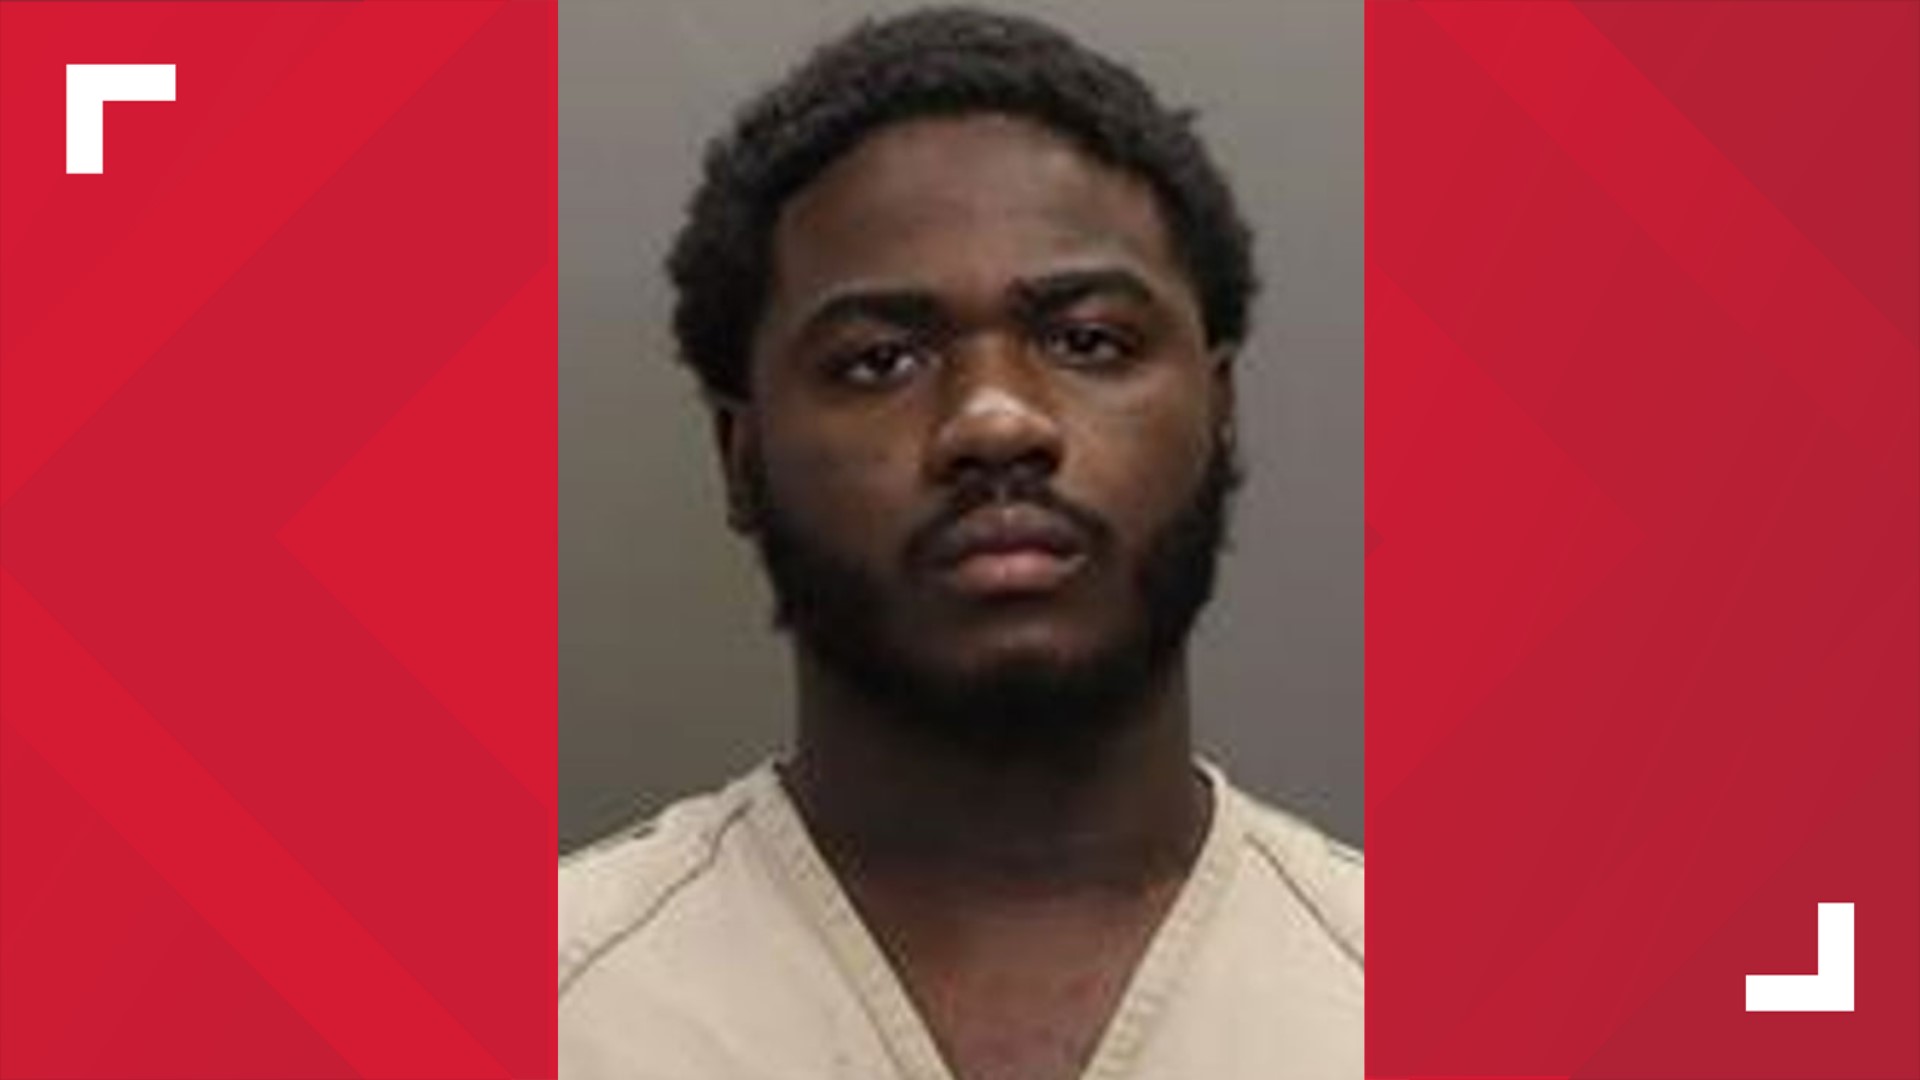 A man has been charged after a 5-year-old shot himself in the head in the South Linden neighborhood on Sunday.